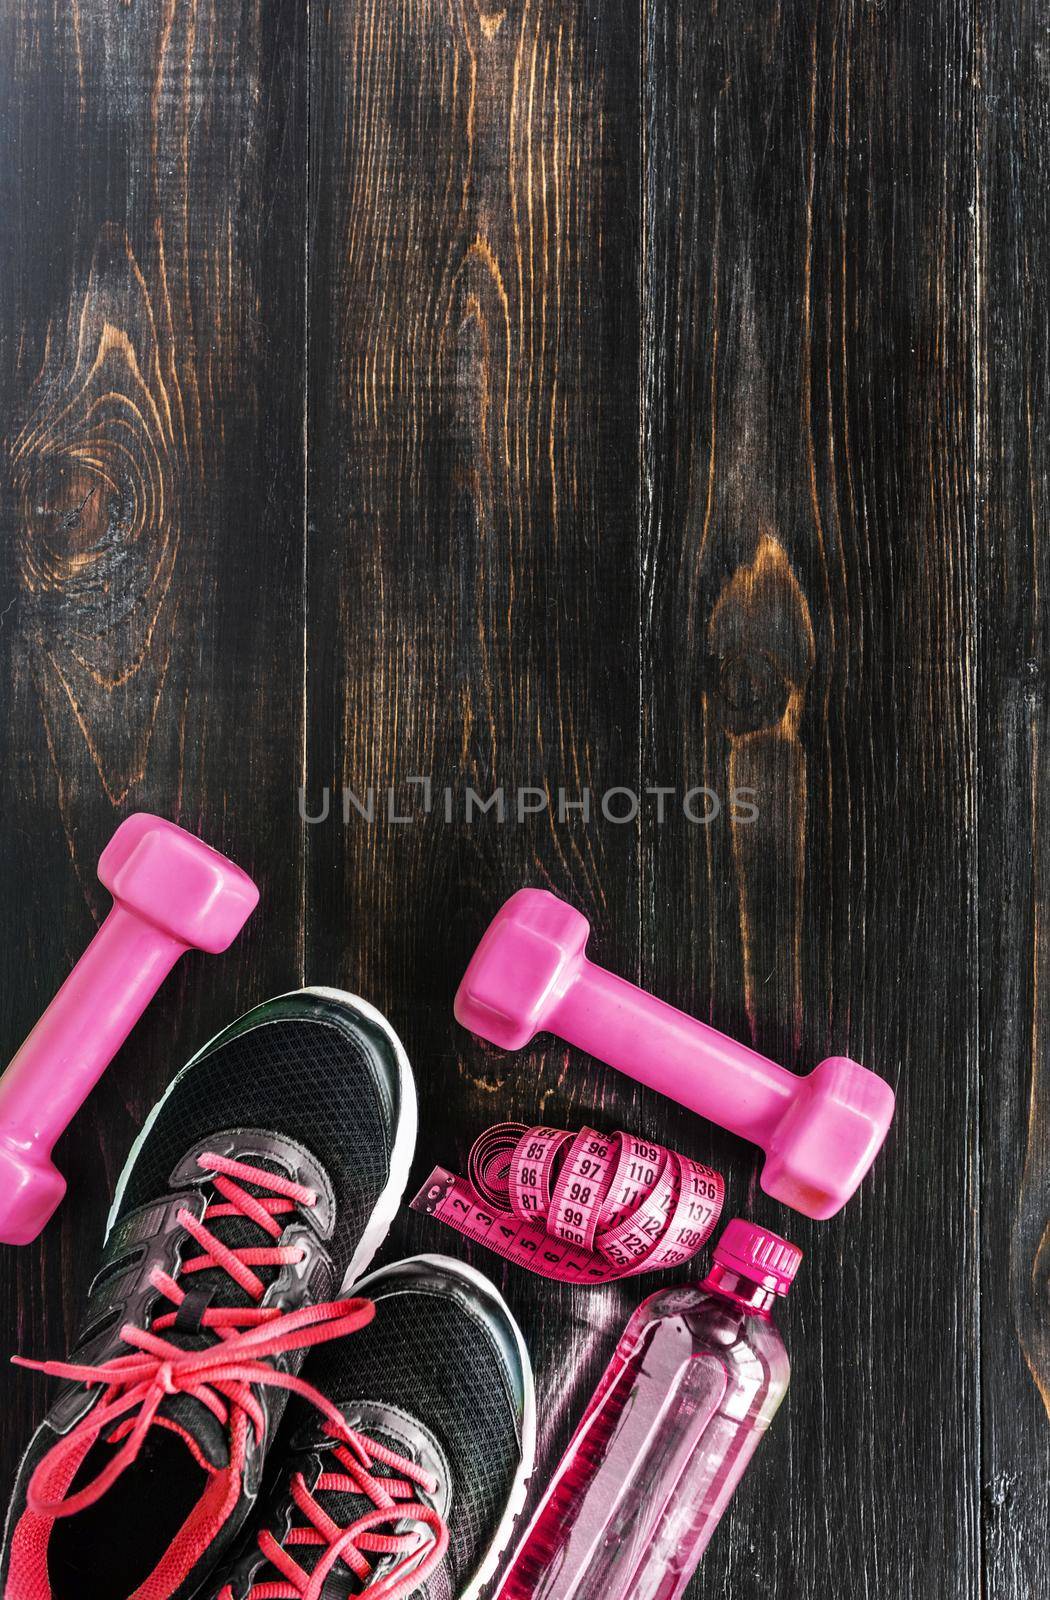 Sneakers dumbbells and a bottle of water. Flat view. All in one color.